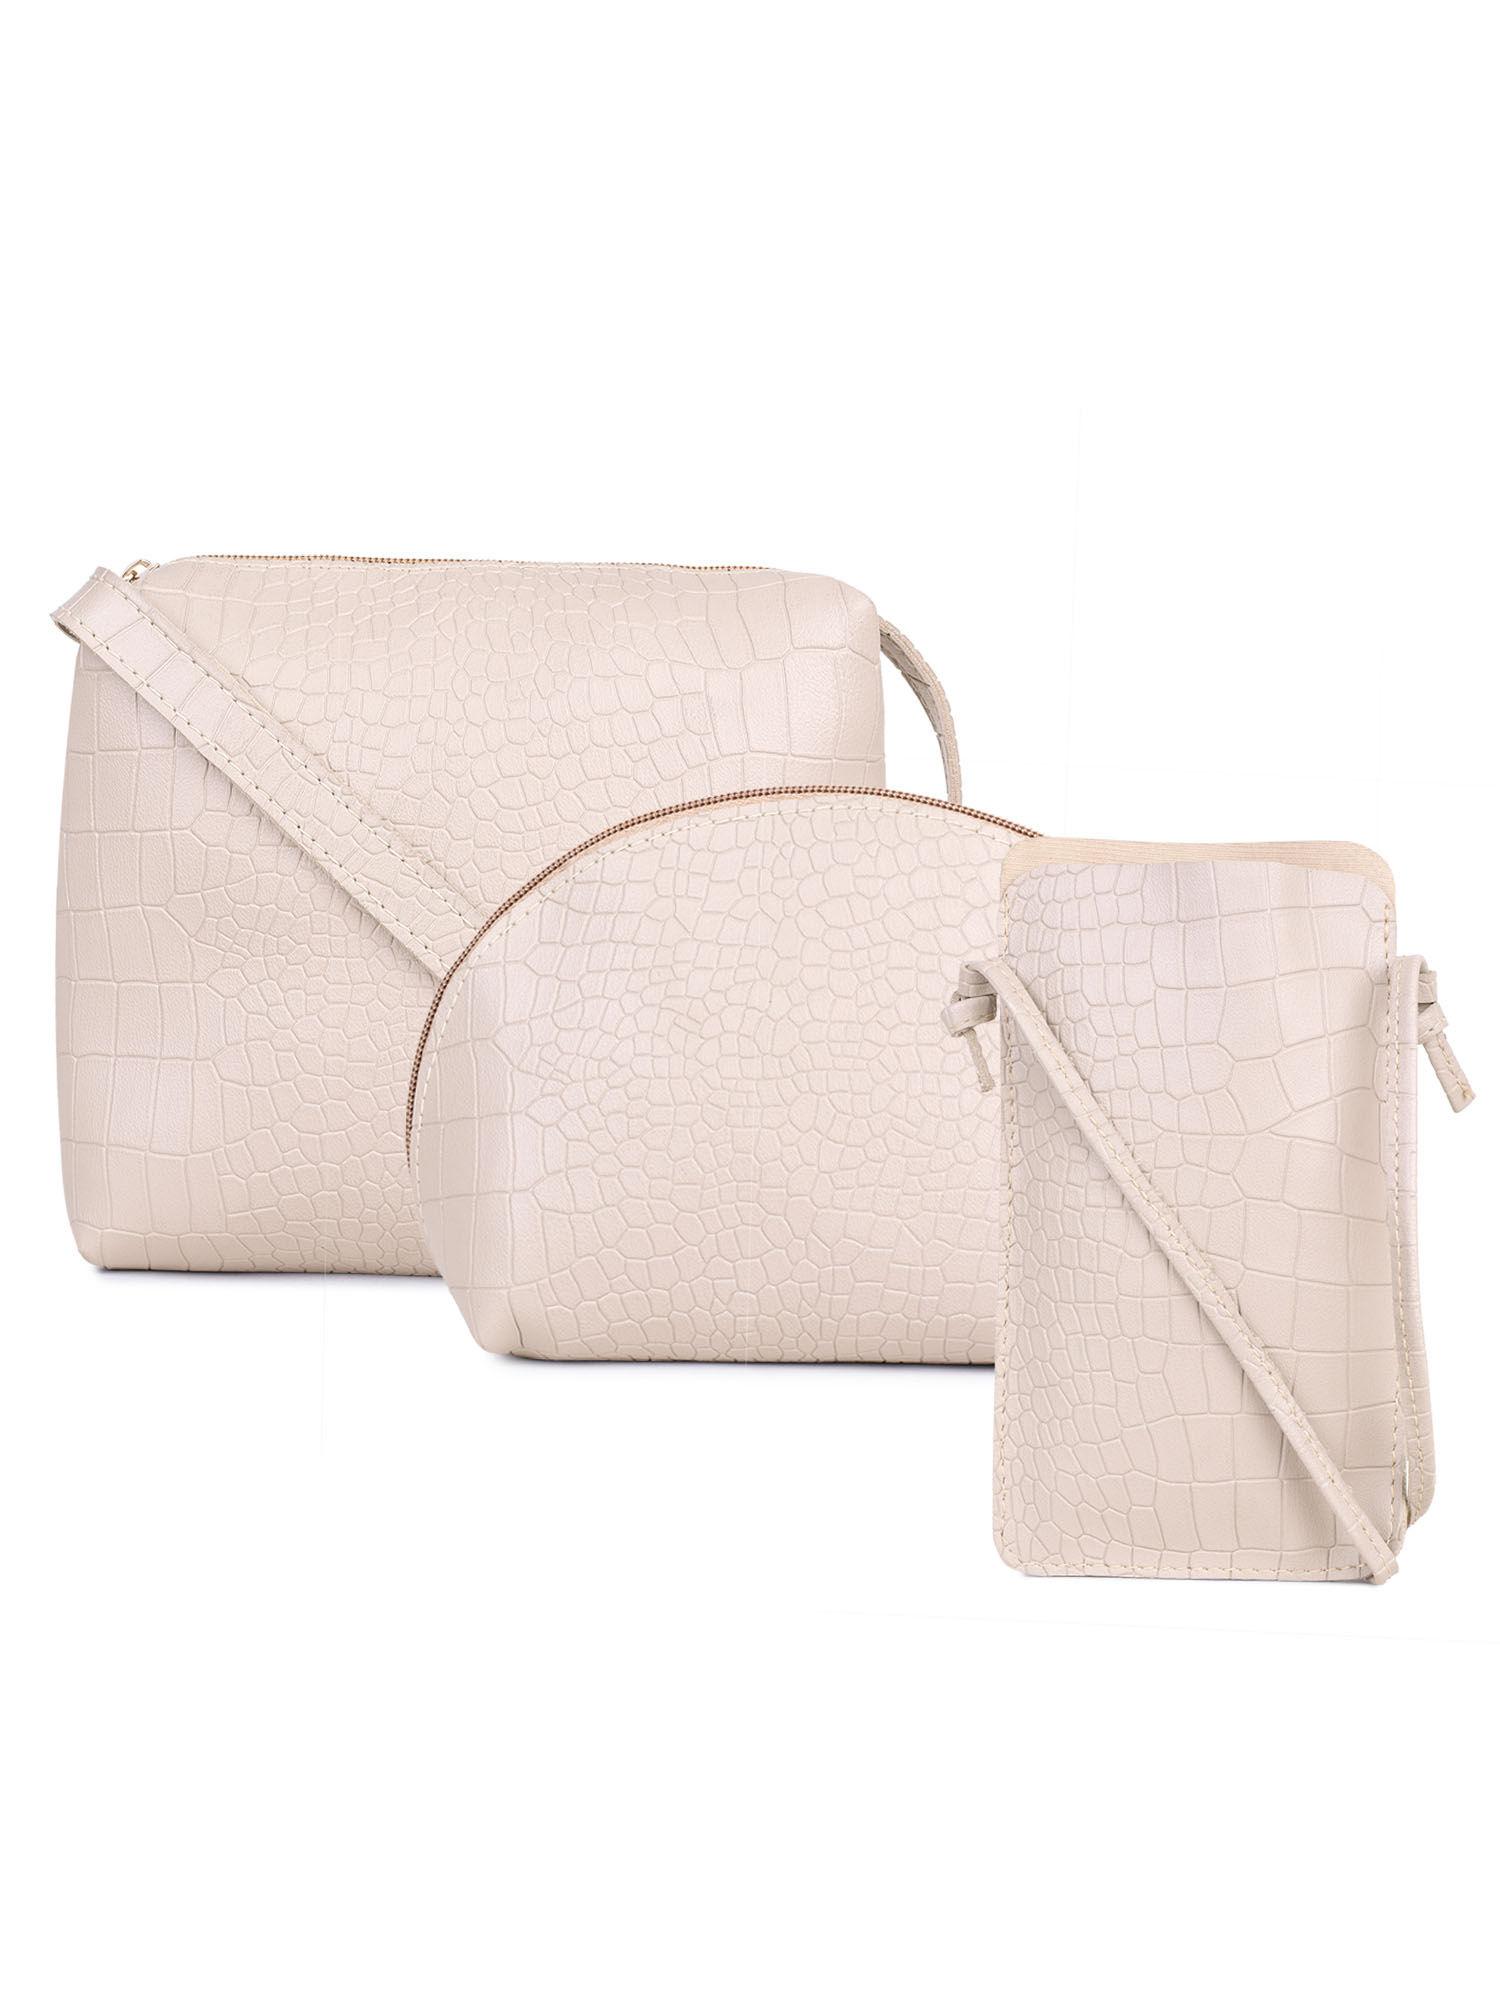 crock style pouch combo of 3 beige